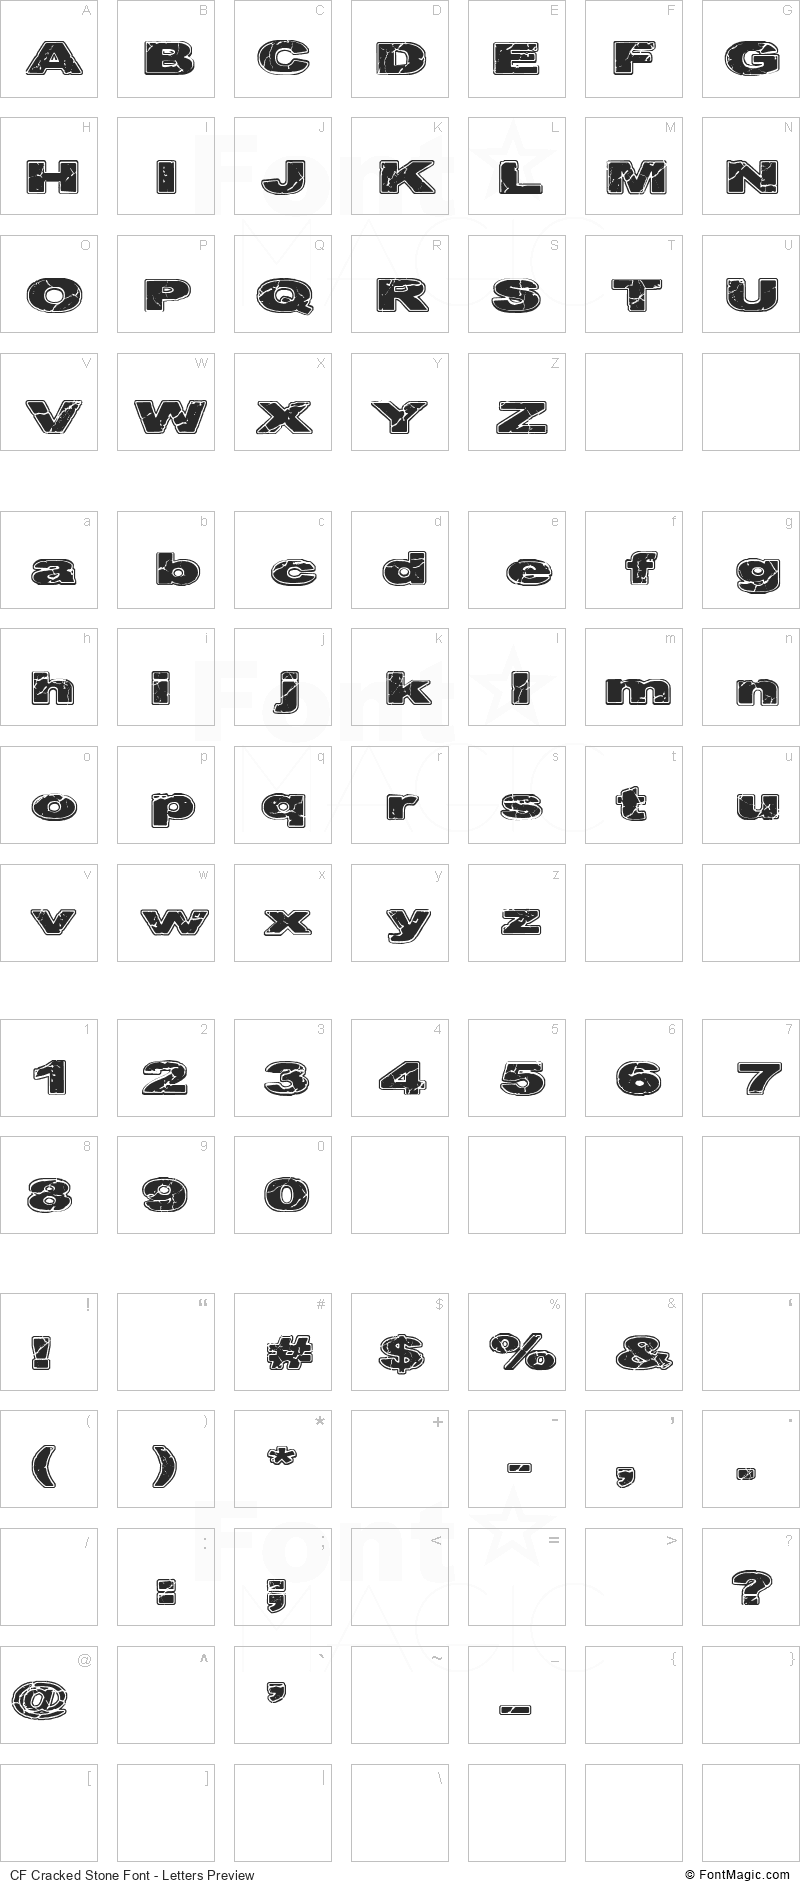 CF Cracked Stone Font - All Latters Preview Chart